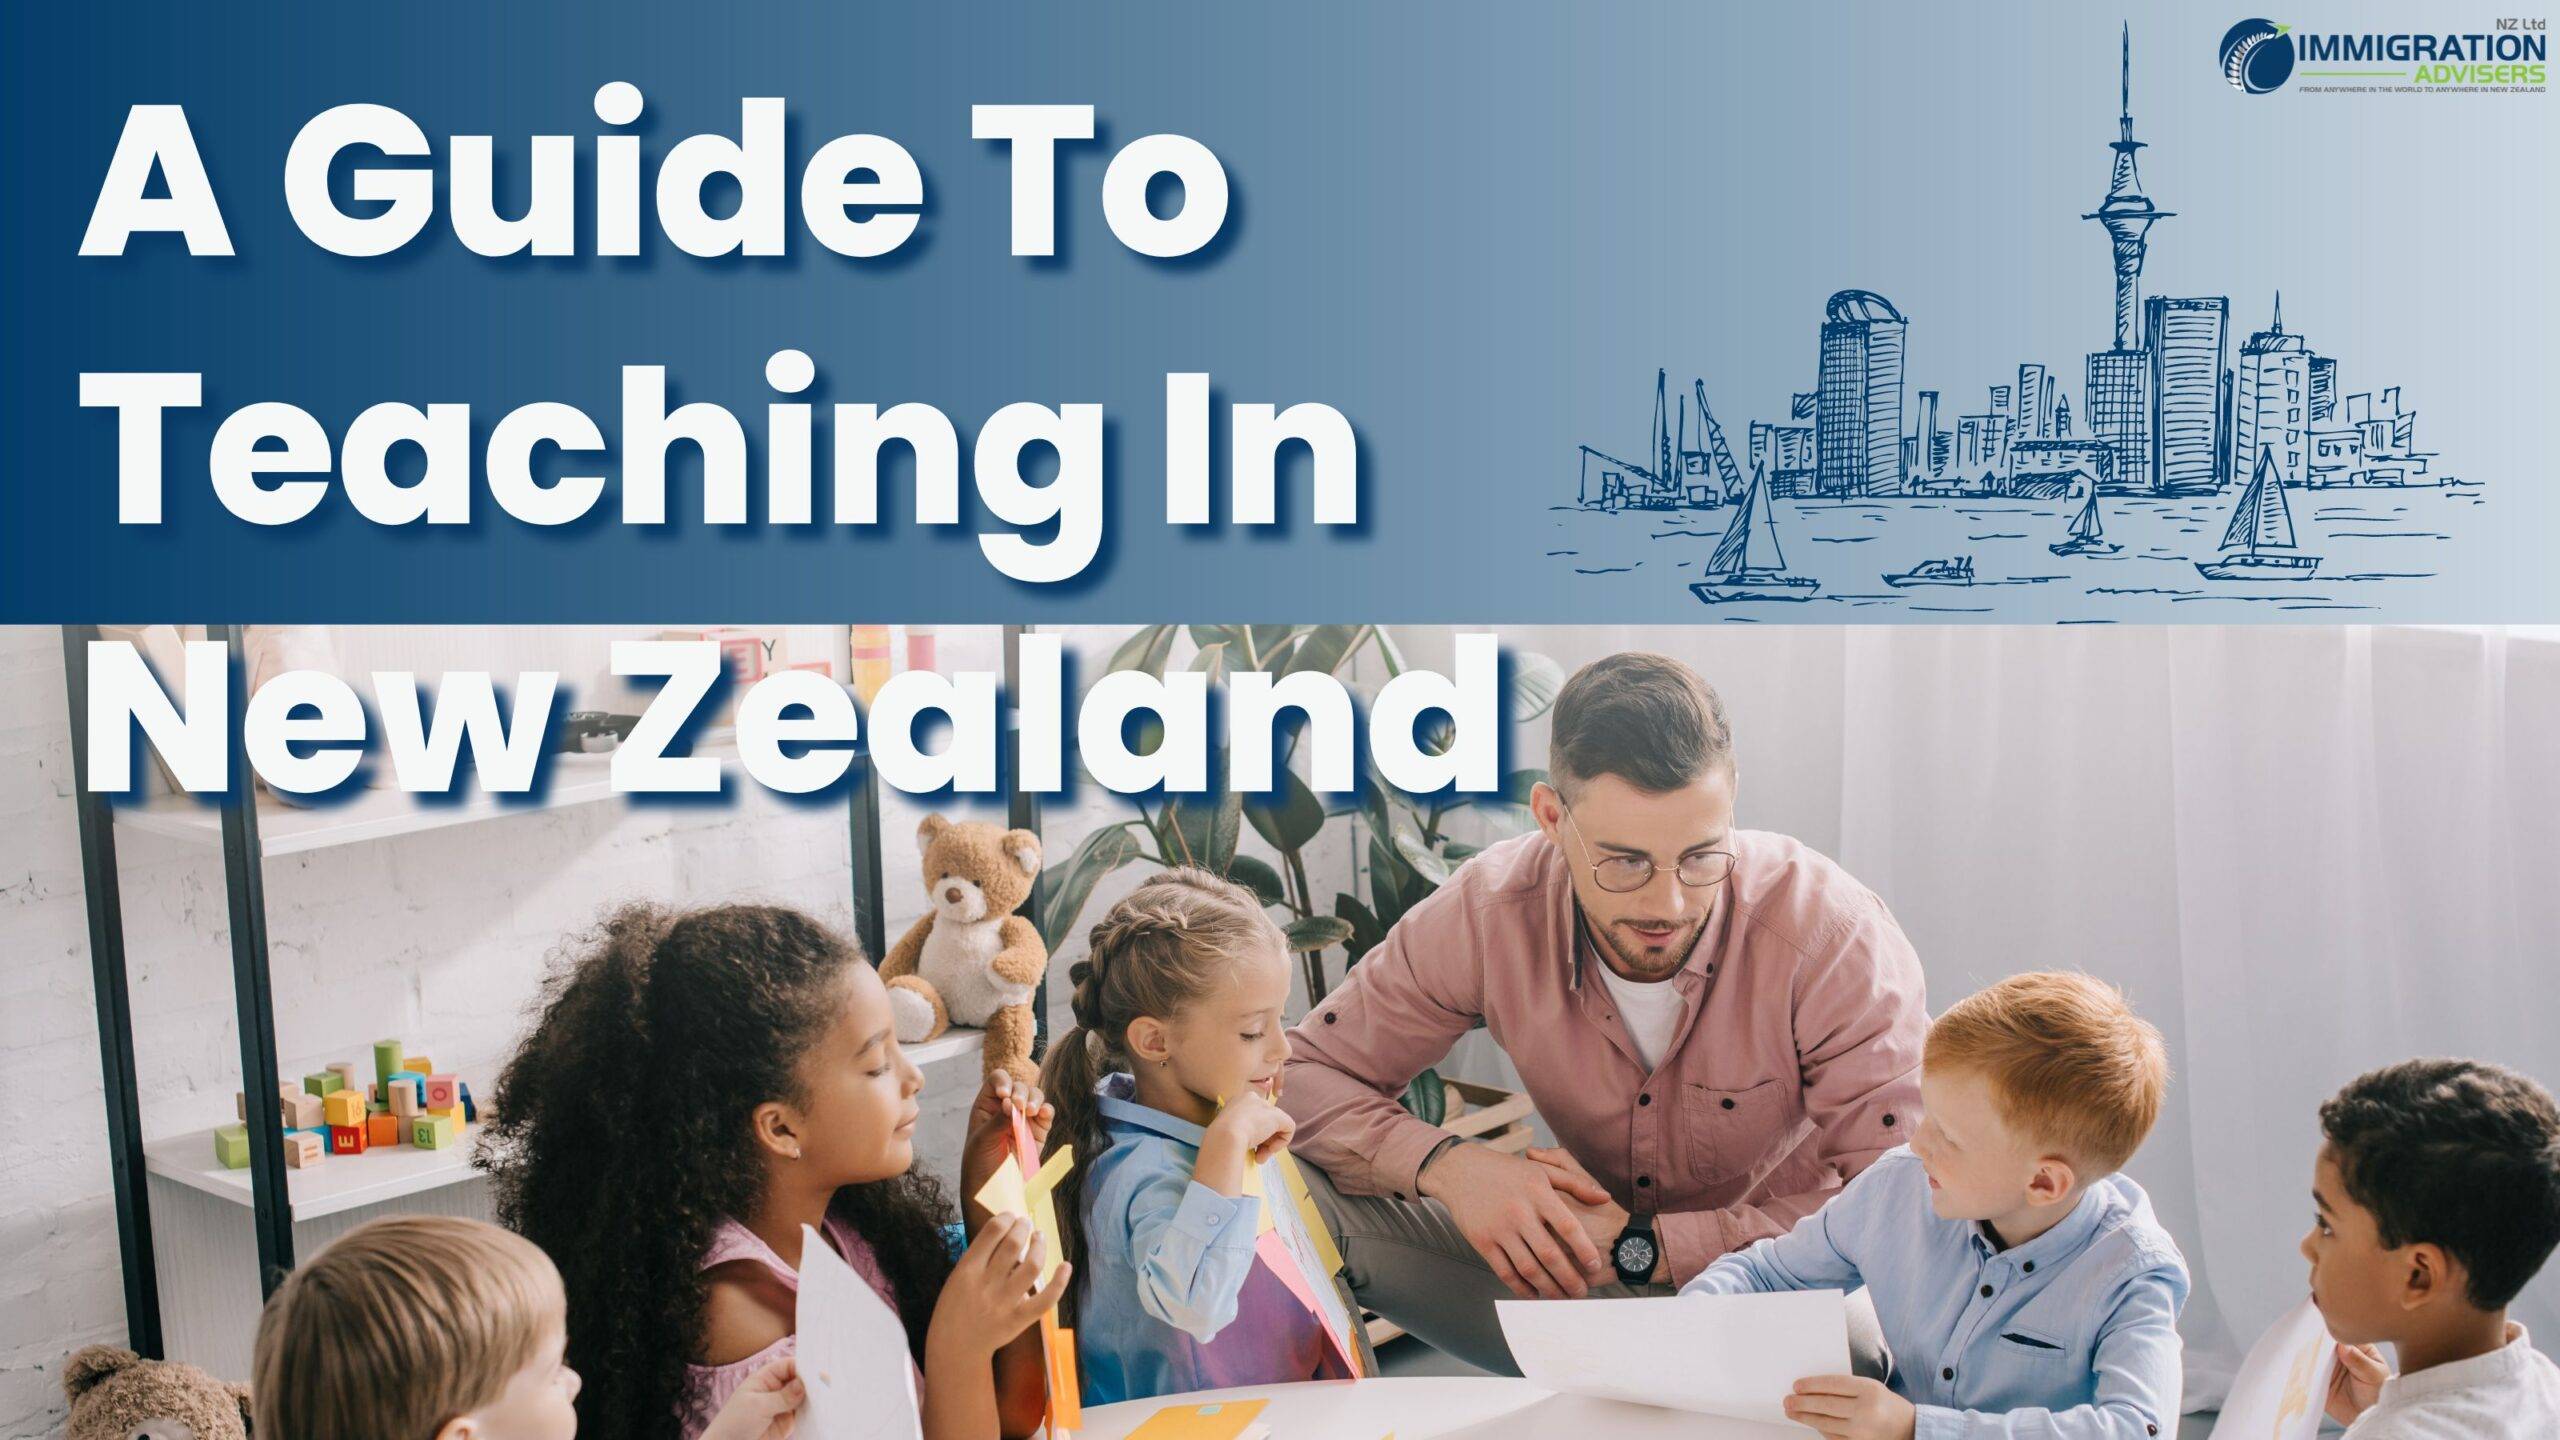 A Guide To Teaching in New Zealand